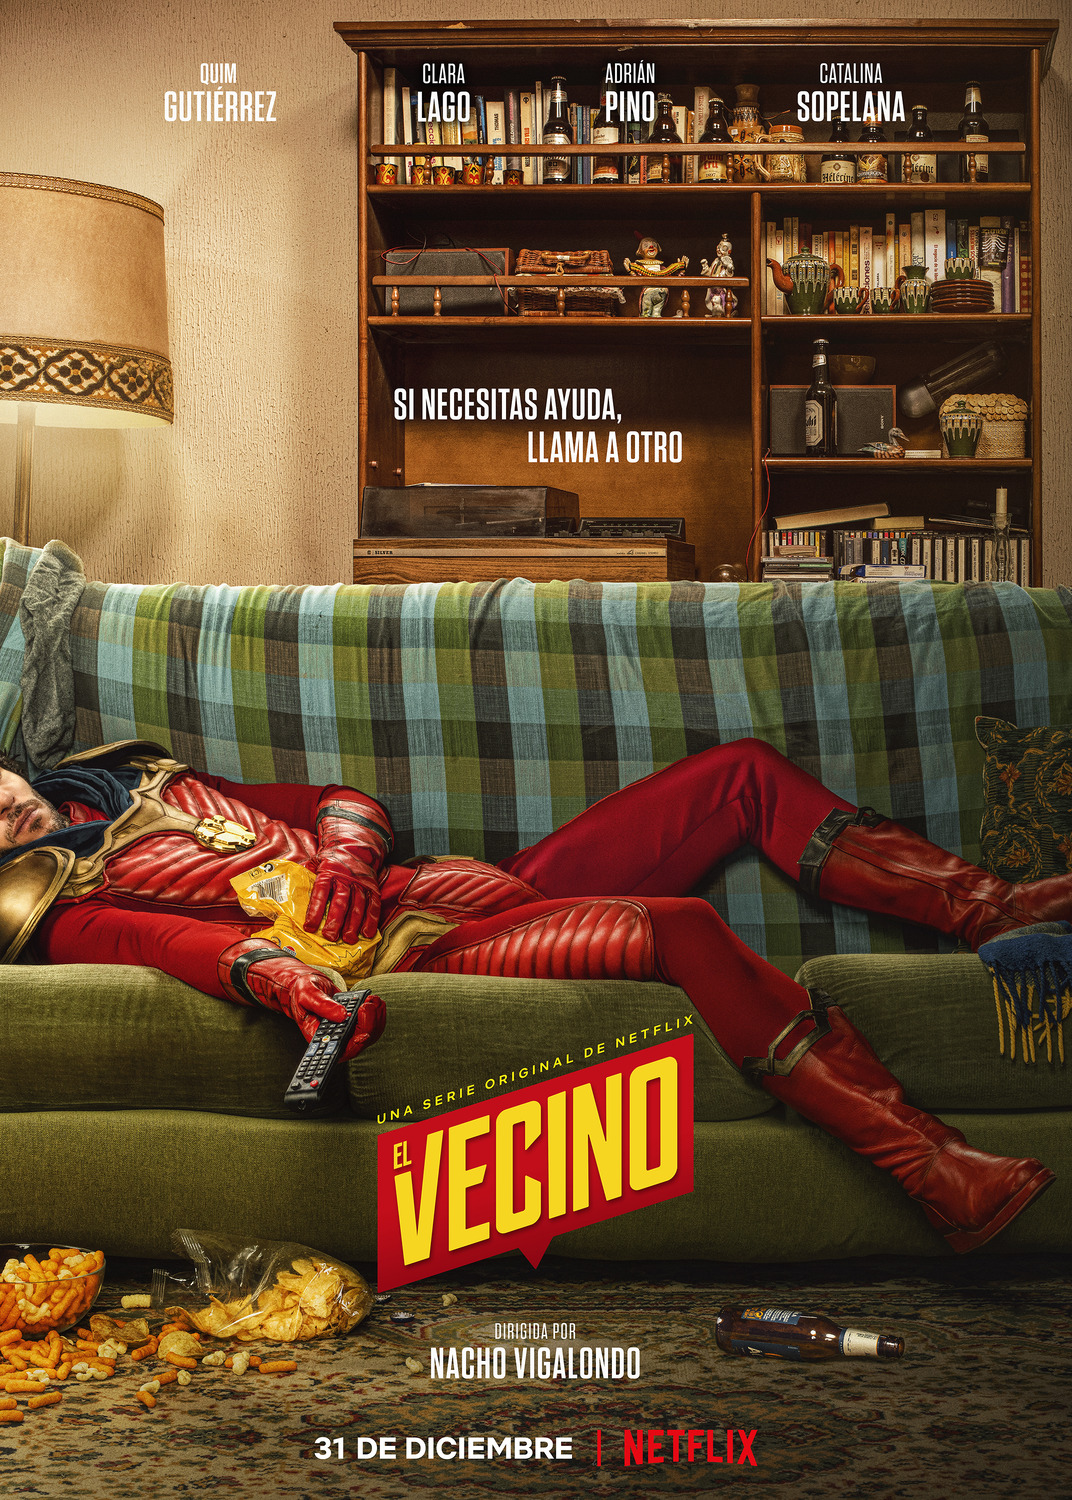 Extra Large TV Poster Image for El vecino (#1 of 9)